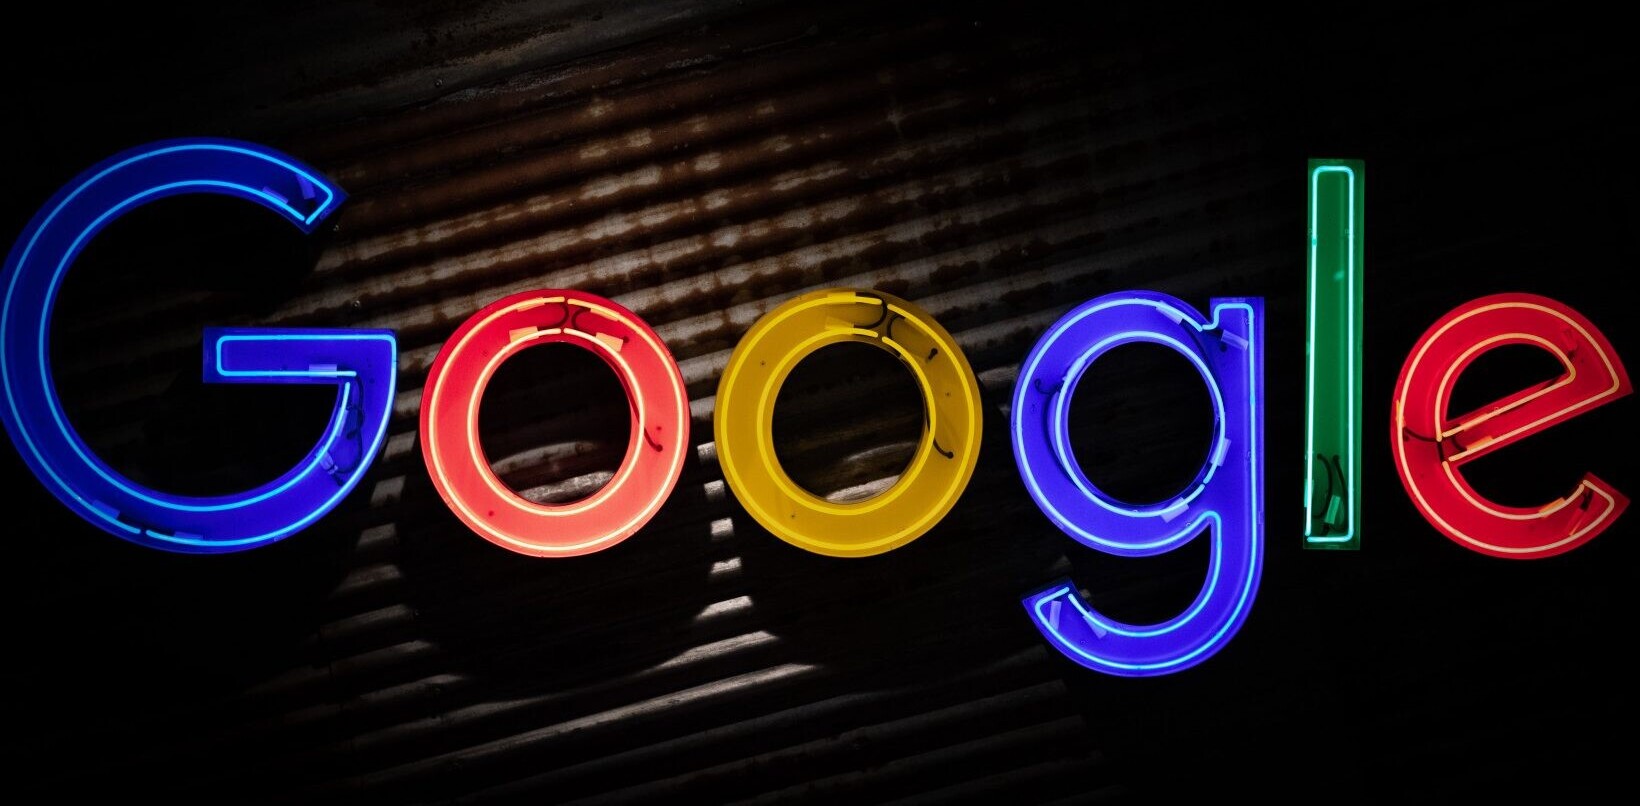 Google has a new site to report bug bounties across its platforms